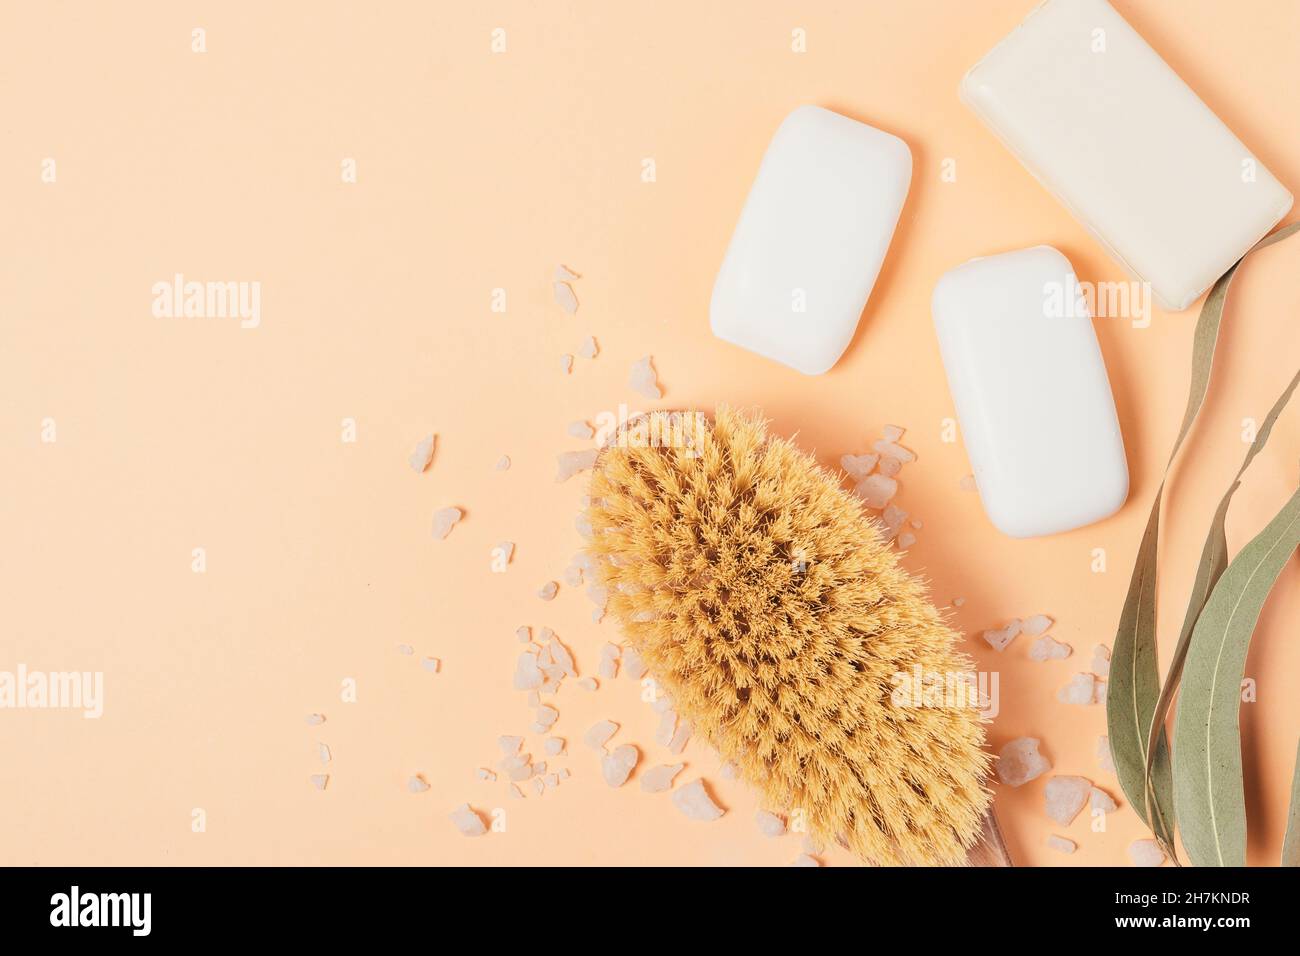 Massage brush with soap bars and bath salt on peach background Stock Photo